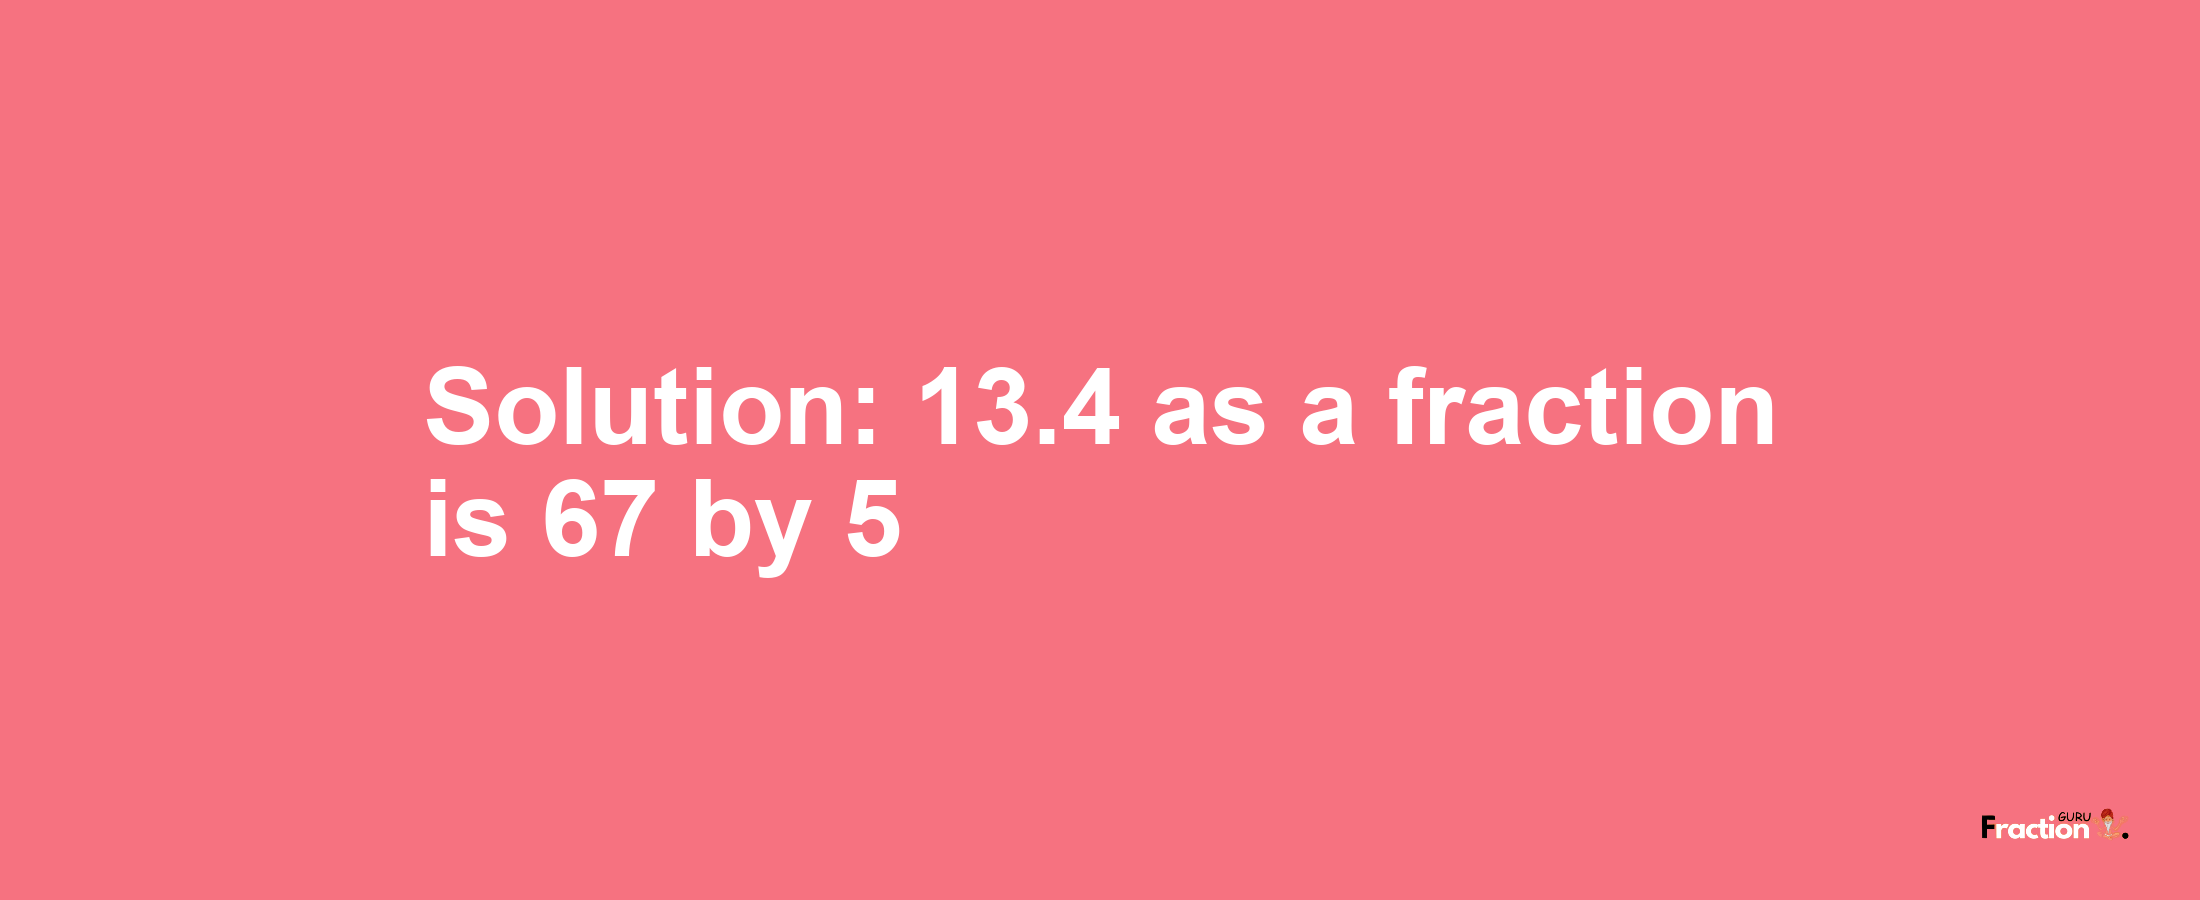 Solution:13.4 as a fraction is 67/5